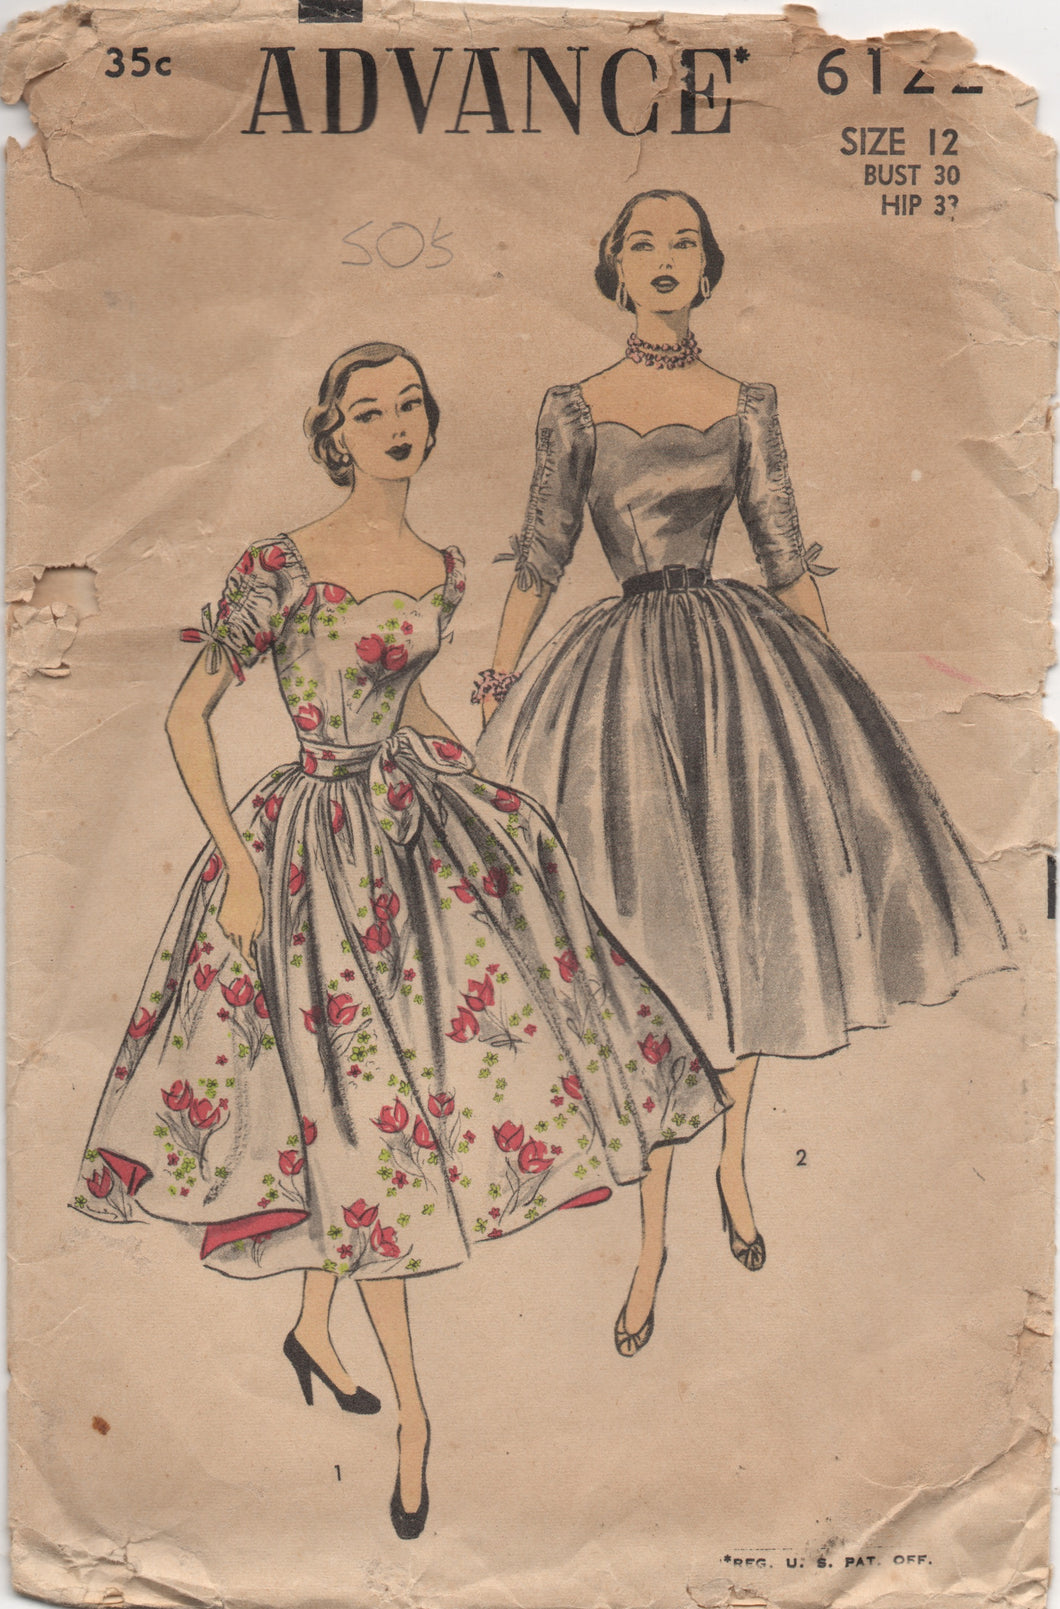 1950's Advance Scallop Neckline Evening Dress Pattern with full skirt and gathered sleeves - Bust 30